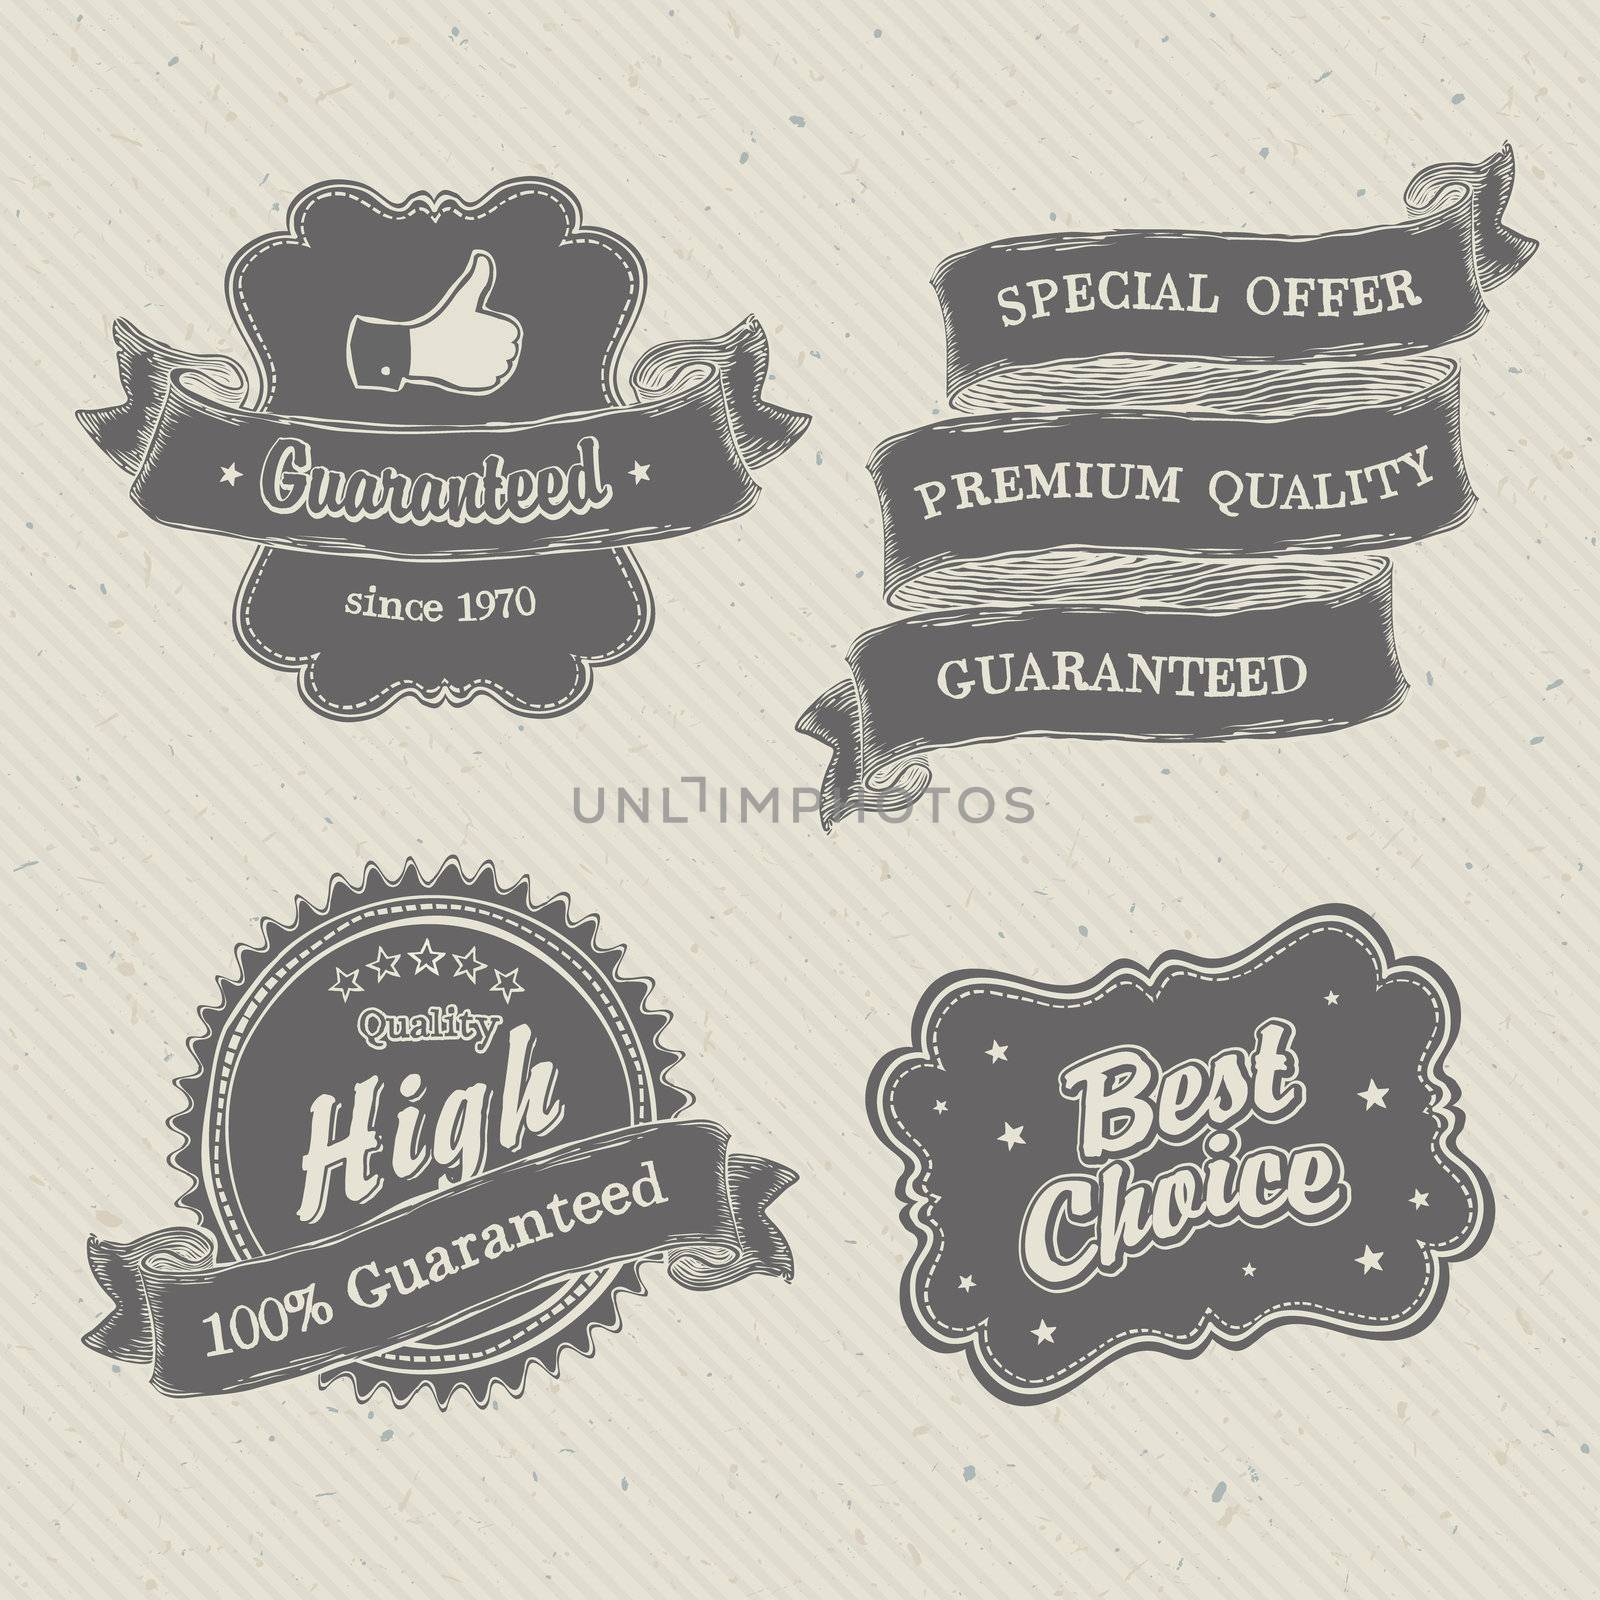 Vintage hand-drawn labels collection on textured paper. Vector illustration, EPS10